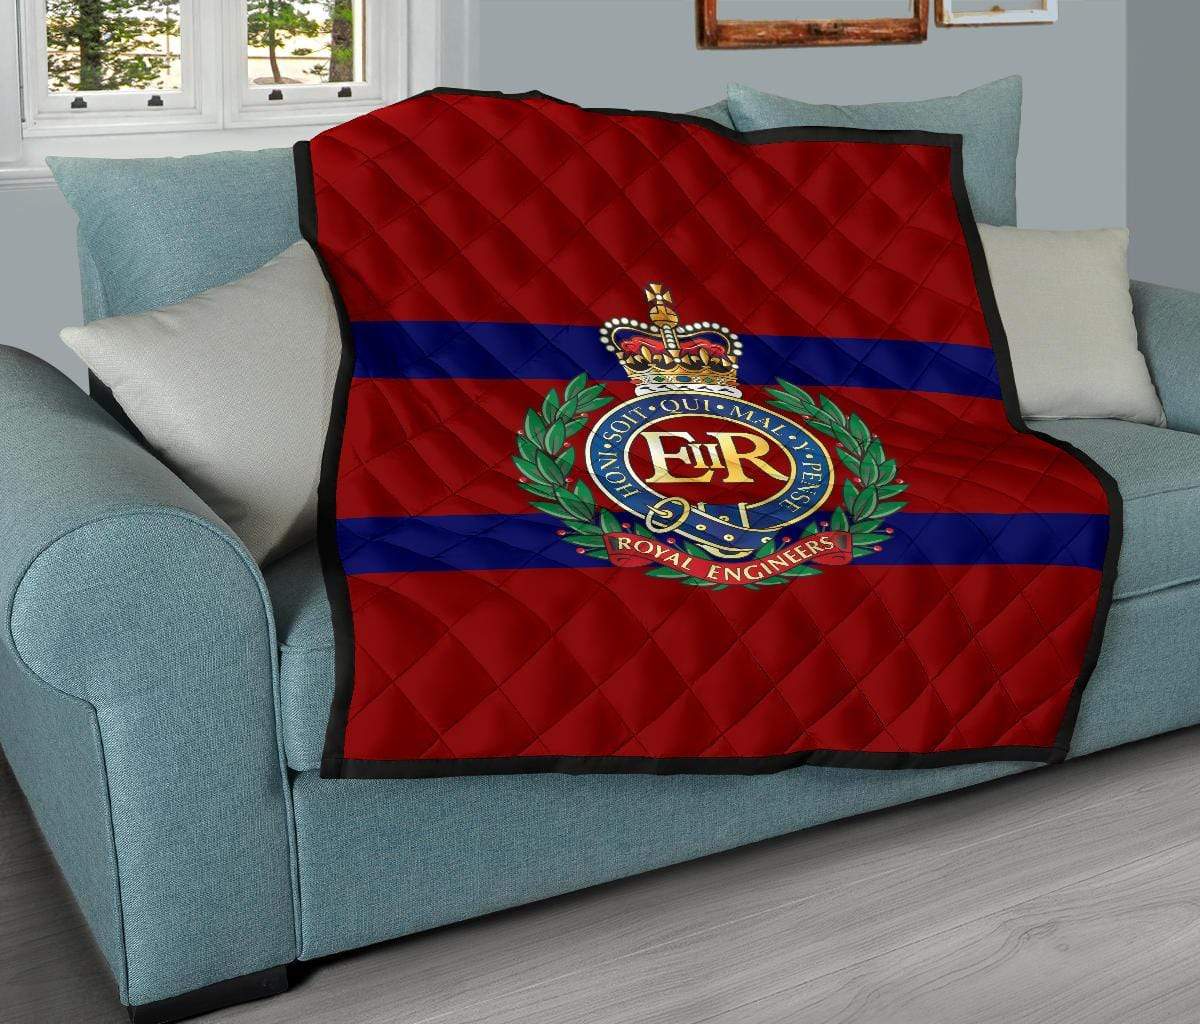 quilt Throw Blanket (55 x 60 inches / 140 x 152 cm) Royal Engineers Quilted Blanket